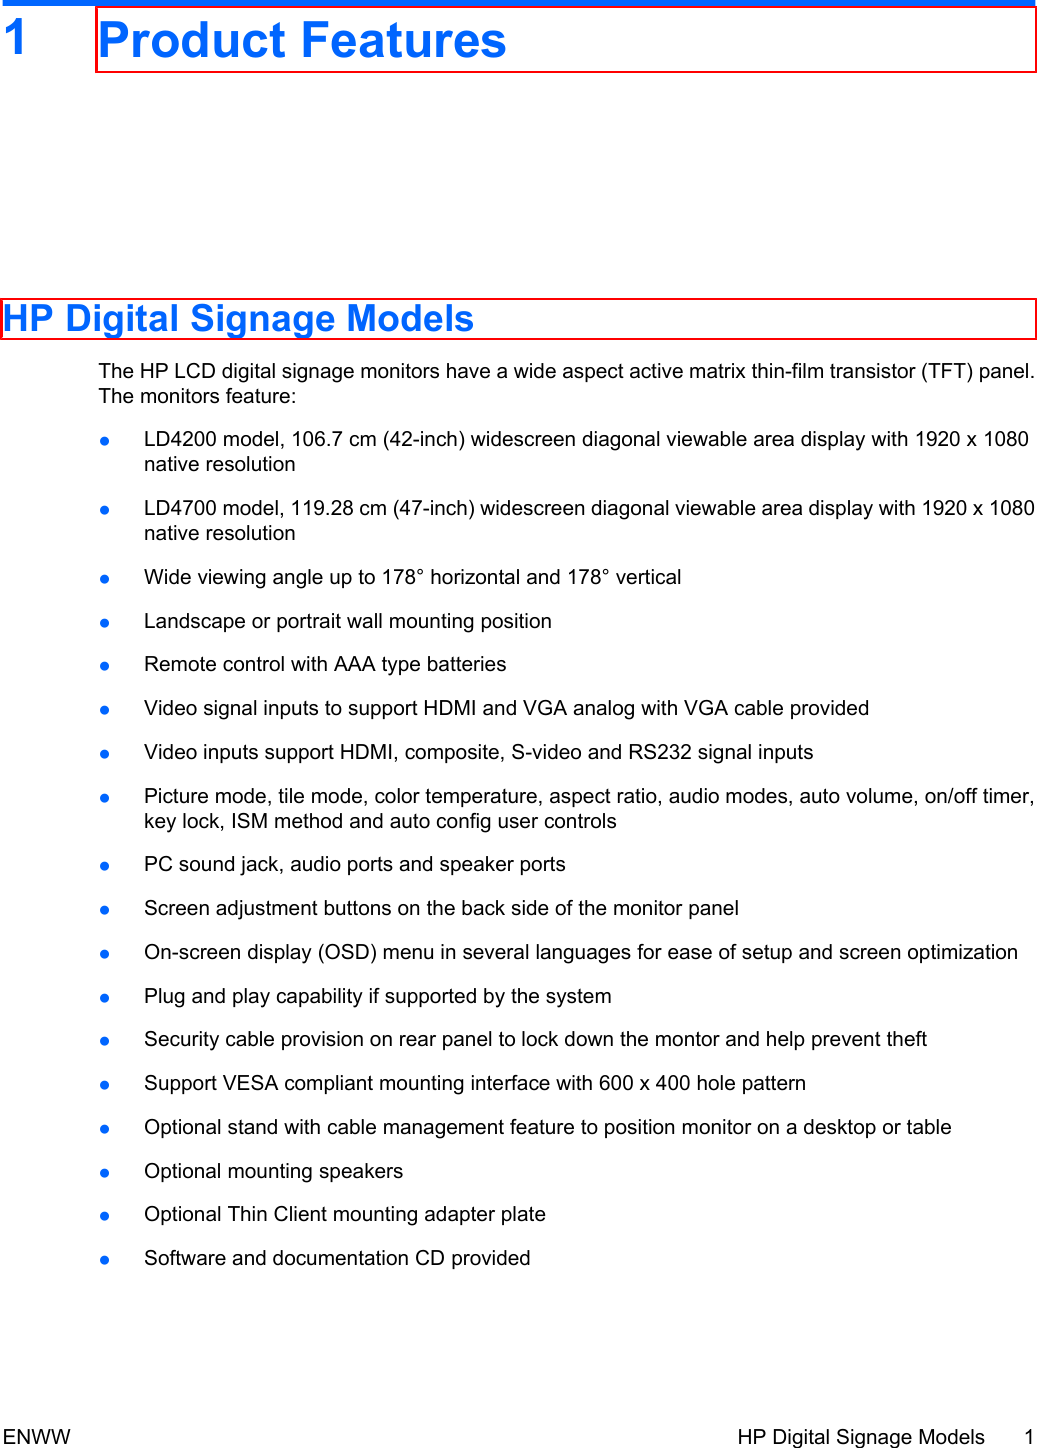 1Product FeaturesHP Digital Signage ModelsThe HP LCD digital signage monitors have a wide aspect active matrix thin-film transistor (TFT) panel.The monitors feature:●LD4200 model, 106.7 cm (42-inch) widescreen diagonal viewable area display with 1920 x 1080native resolution●LD4700 model, 119.28 cm (47-inch) widescreen diagonal viewable area display with 1920 x 1080native resolution●Wide viewing angle up to 178° horizontal and 178° vertical●Landscape or portrait wall mounting position●Remote control with AAA type batteries●Video signal inputs to support HDMI and VGA analog with VGA cable provided●Video inputs support HDMI, composite, S-video and RS232 signal inputs●Picture mode, tile mode, color temperature, aspect ratio, audio modes, auto volume, on/off timer,key lock, ISM method and auto config user controls●PC sound jack, audio ports and speaker ports●Screen adjustment buttons on the back side of the monitor panel●On-screen display (OSD) menu in several languages for ease of setup and screen optimization●Plug and play capability if supported by the system●Security cable provision on rear panel to lock down the montor and help prevent theft●Support VESA compliant mounting interface with 600 x 400 hole pattern●Optional stand with cable management feature to position monitor on a desktop or table●Optional mounting speakers●Optional Thin Client mounting adapter plate●Software and documentation CD providedENWW HP Digital Signage Models 1